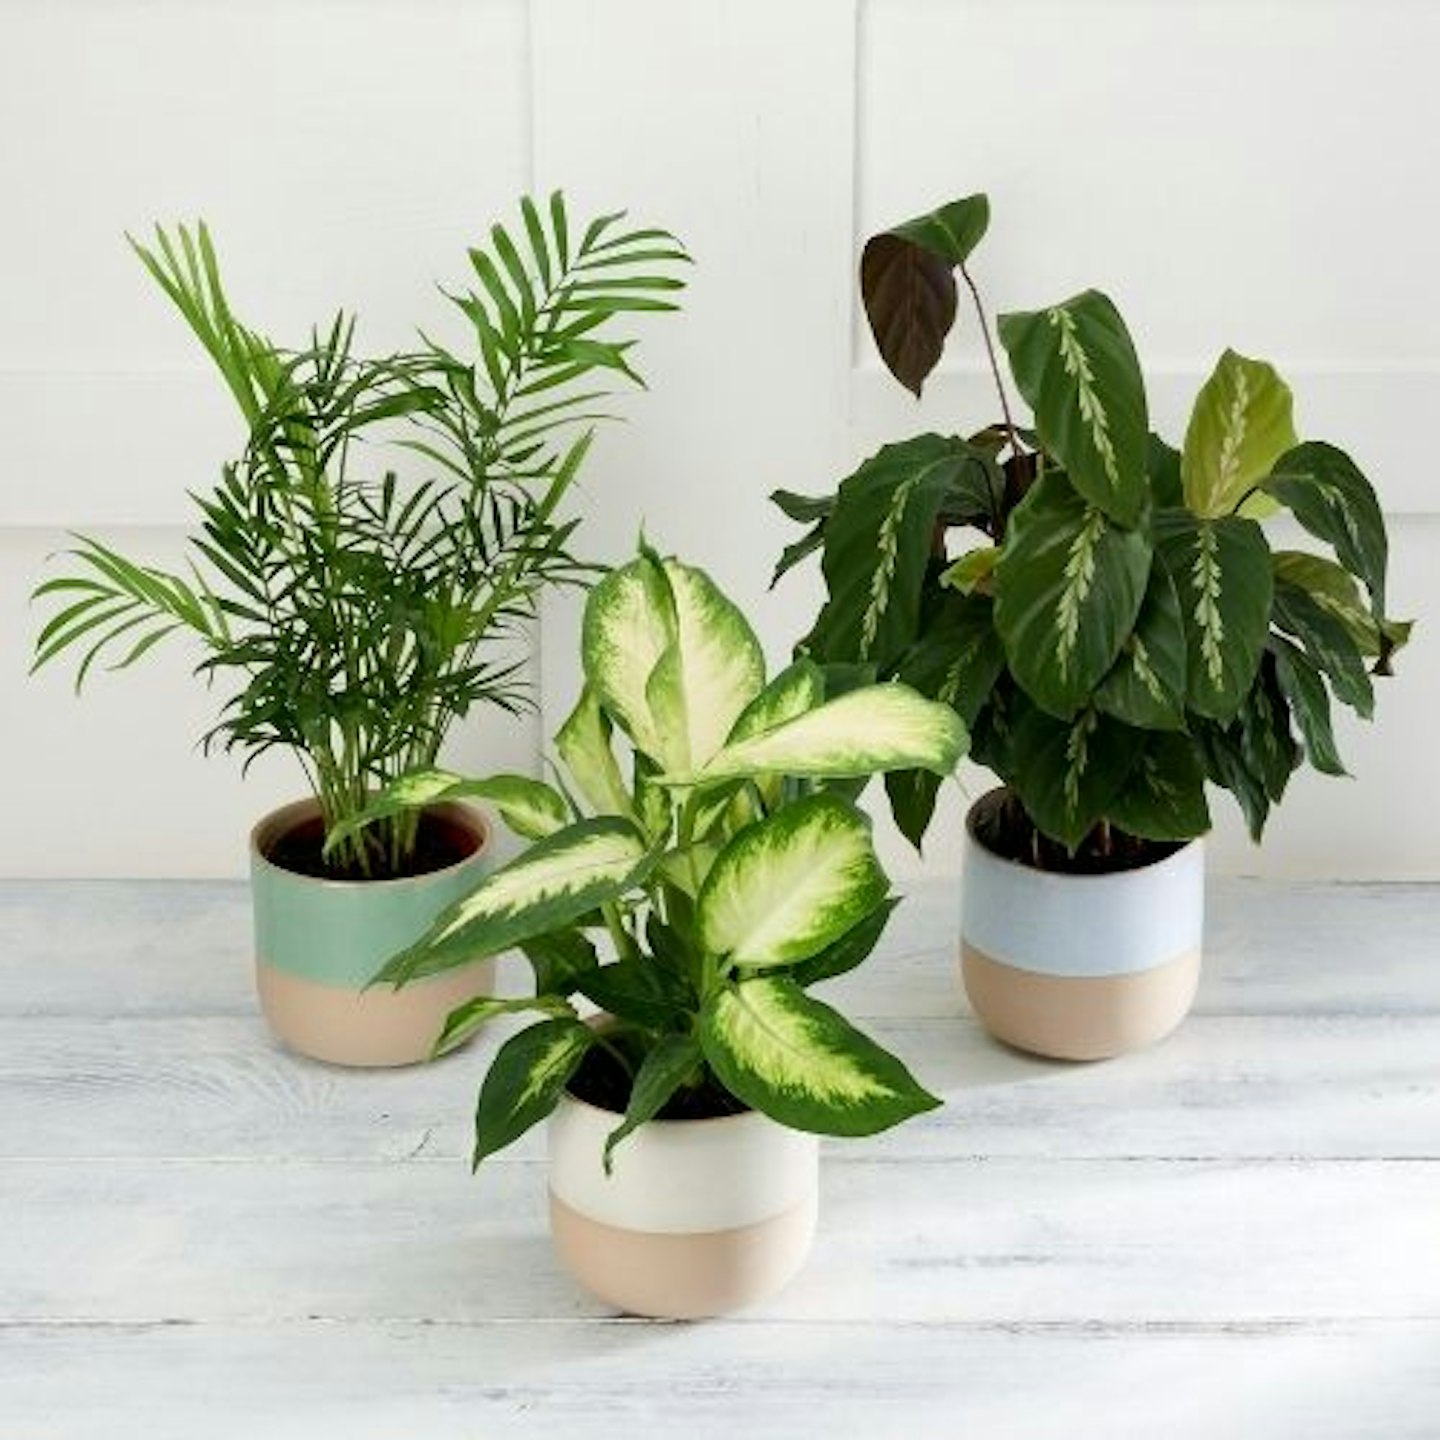 Sainsburyu0026#039;s Patterned Potted Plant